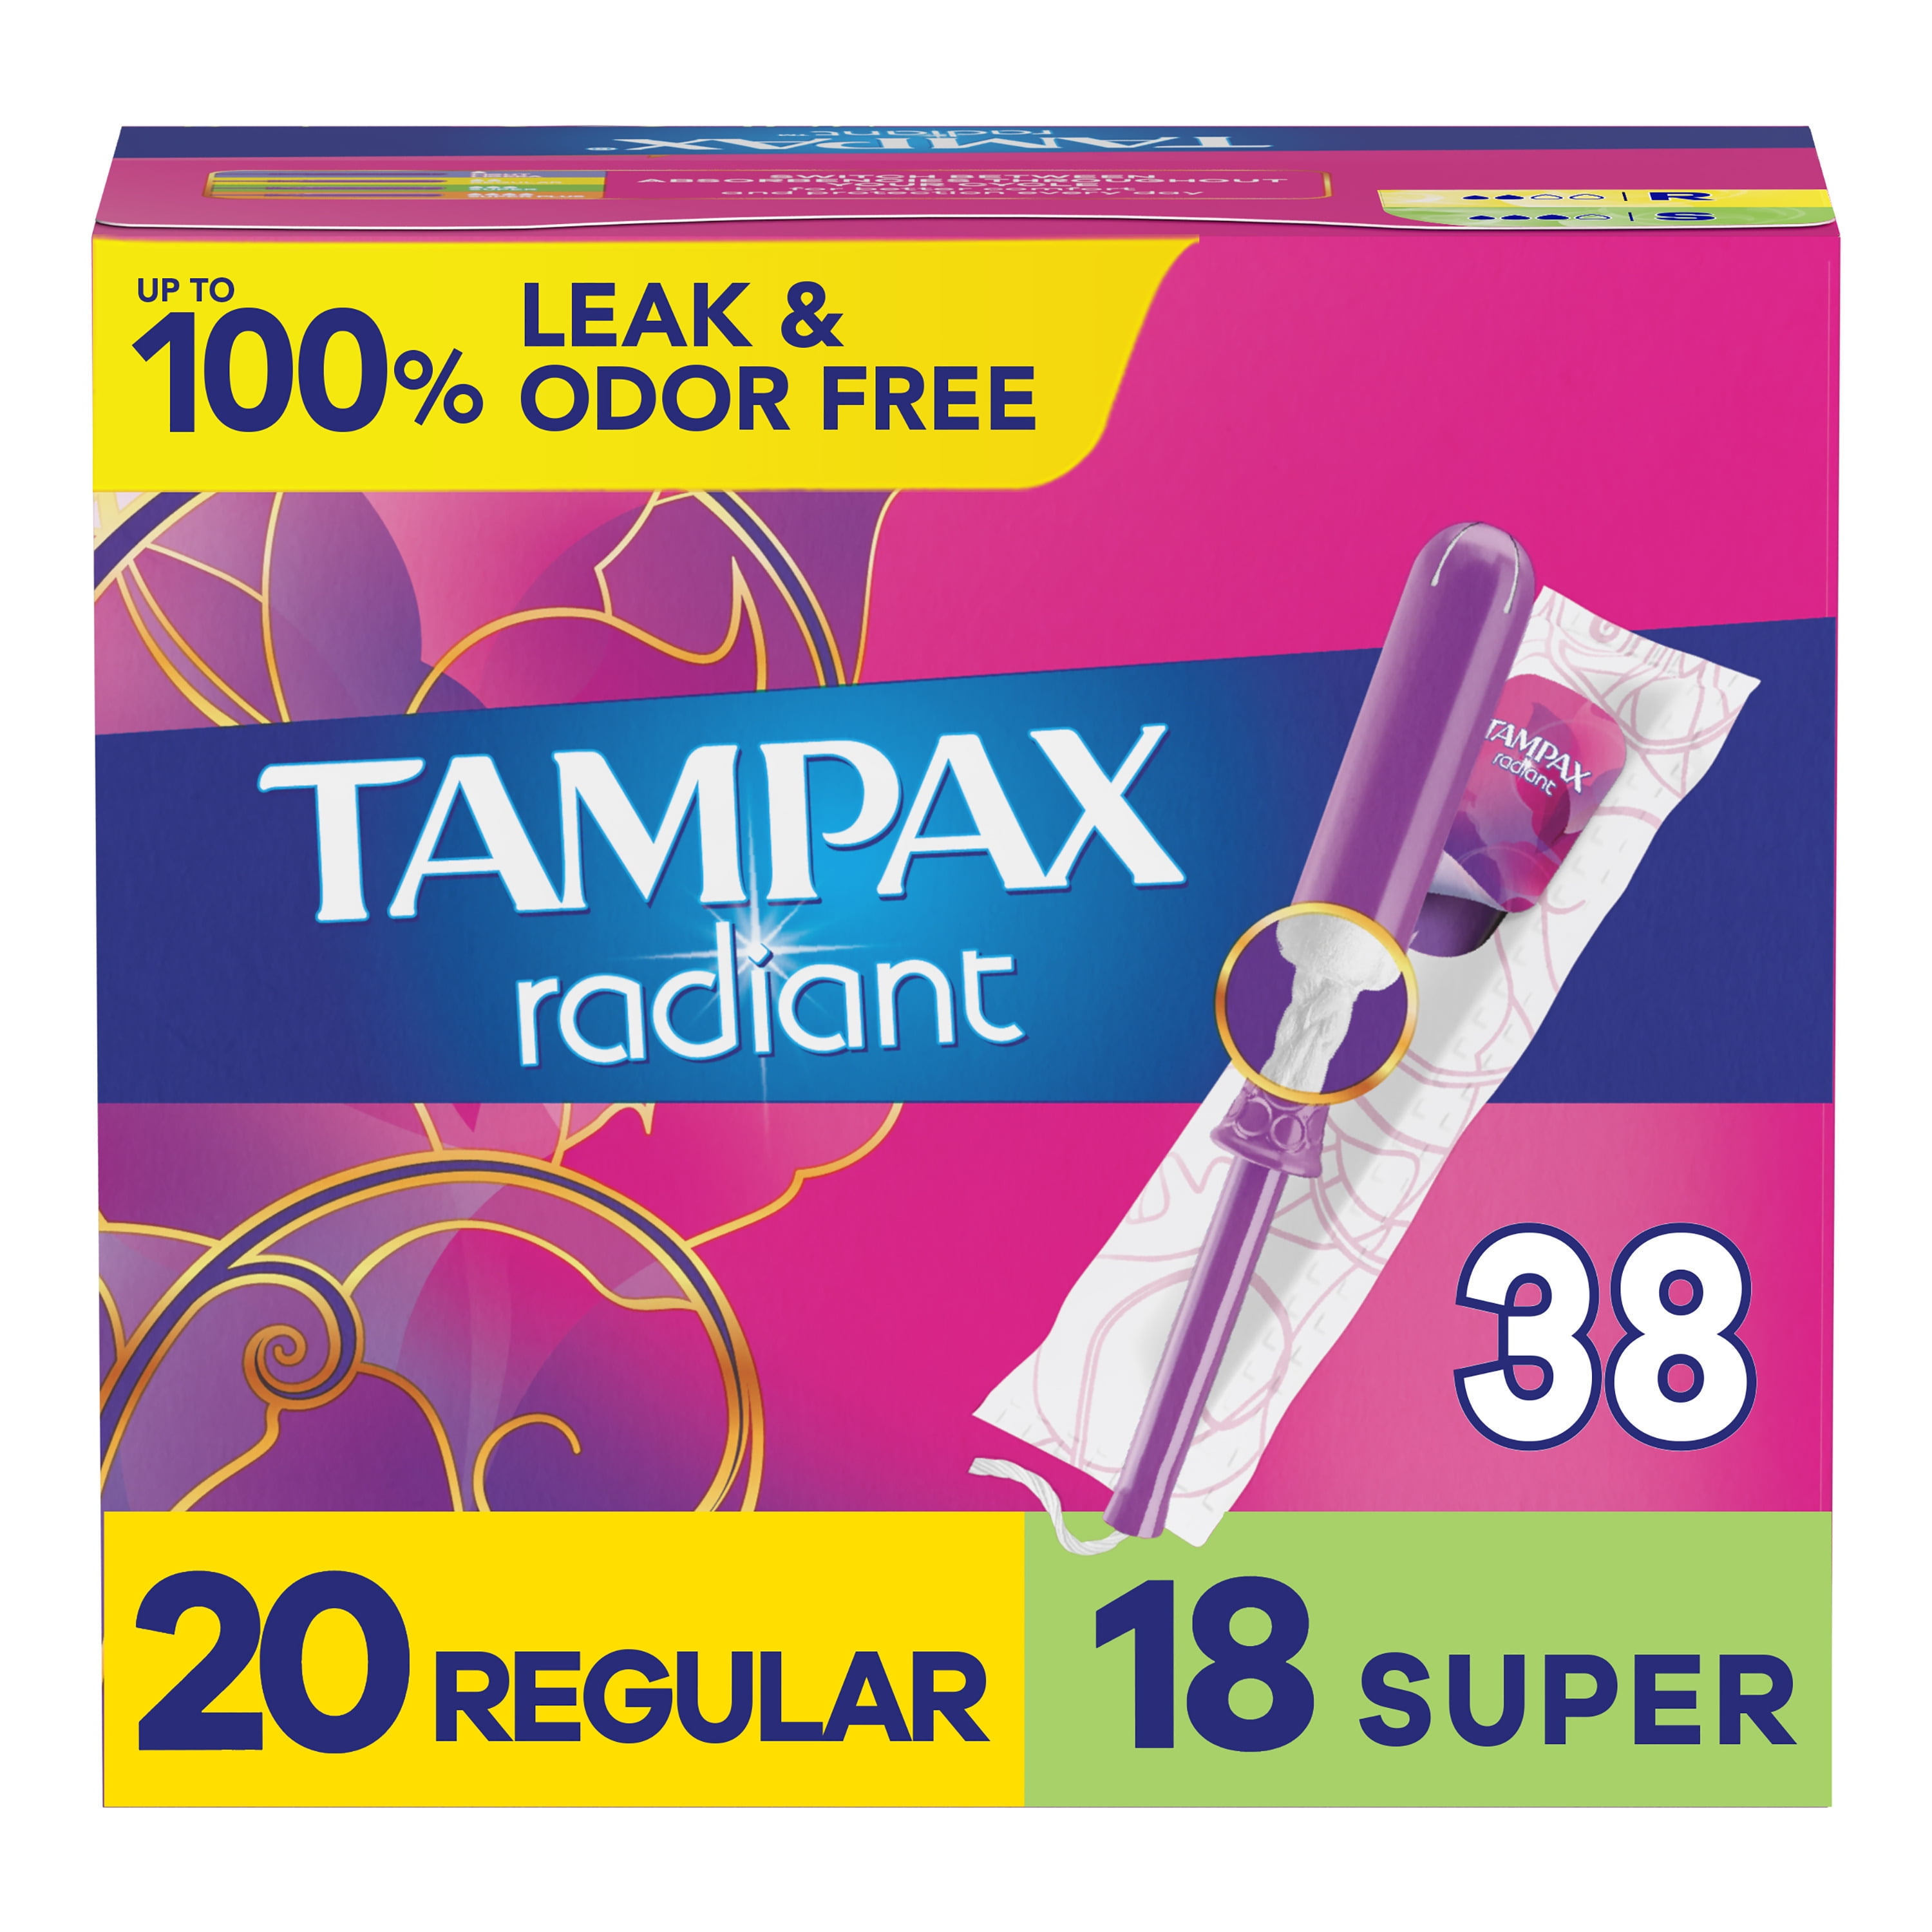 Tampax Pearl LeakGuard Protection Tampons Ultra Absorbency Unscented, 45  count - Harris Teeter